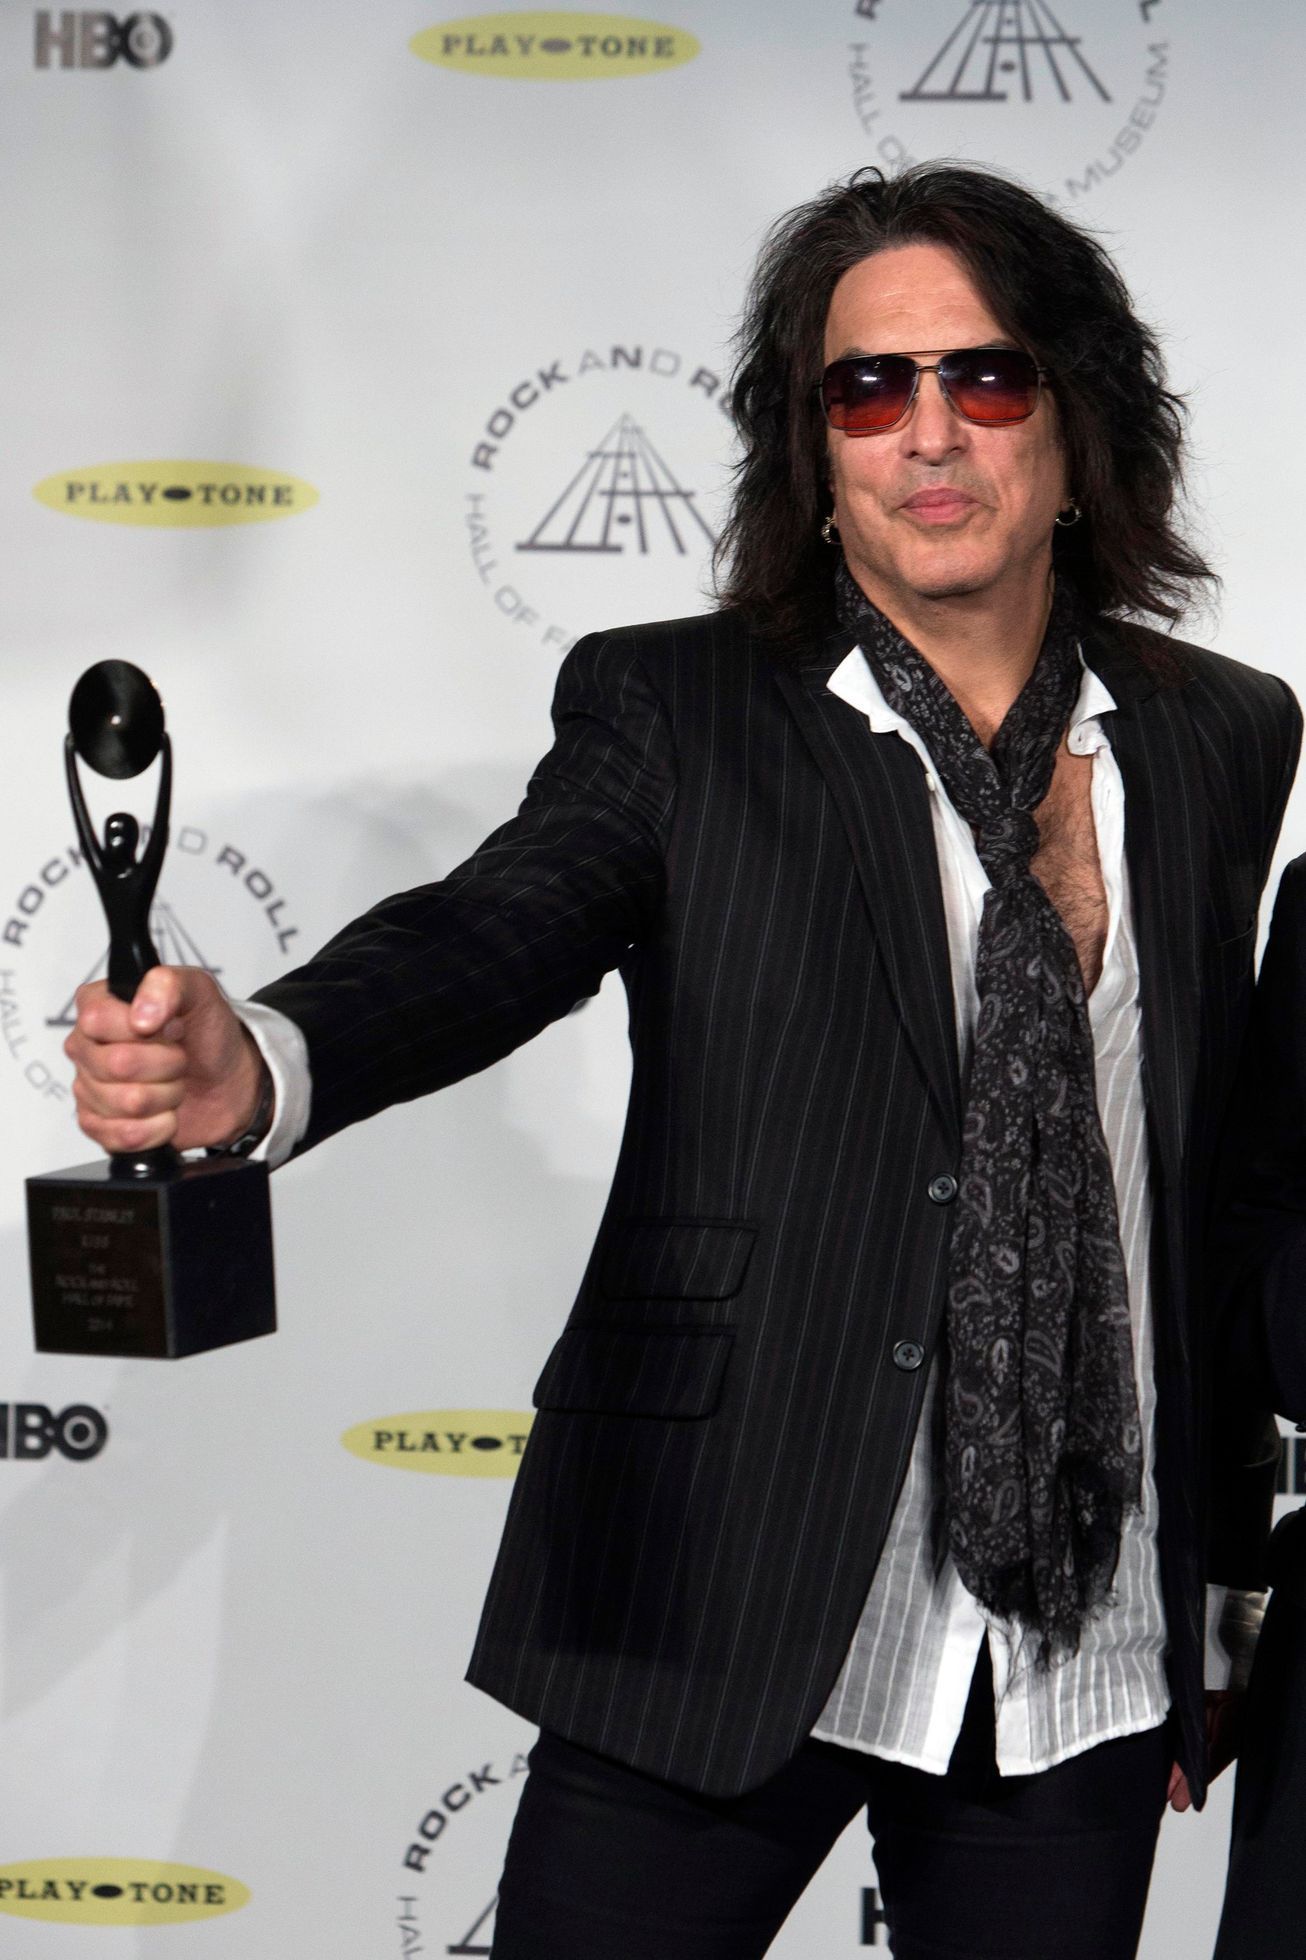 Musician Stanley of rock band Kiss poses for pictures after being inducted at 29th annual Rock and Roll Hall of Fame Induction Ceremony in Brooklyn, New York